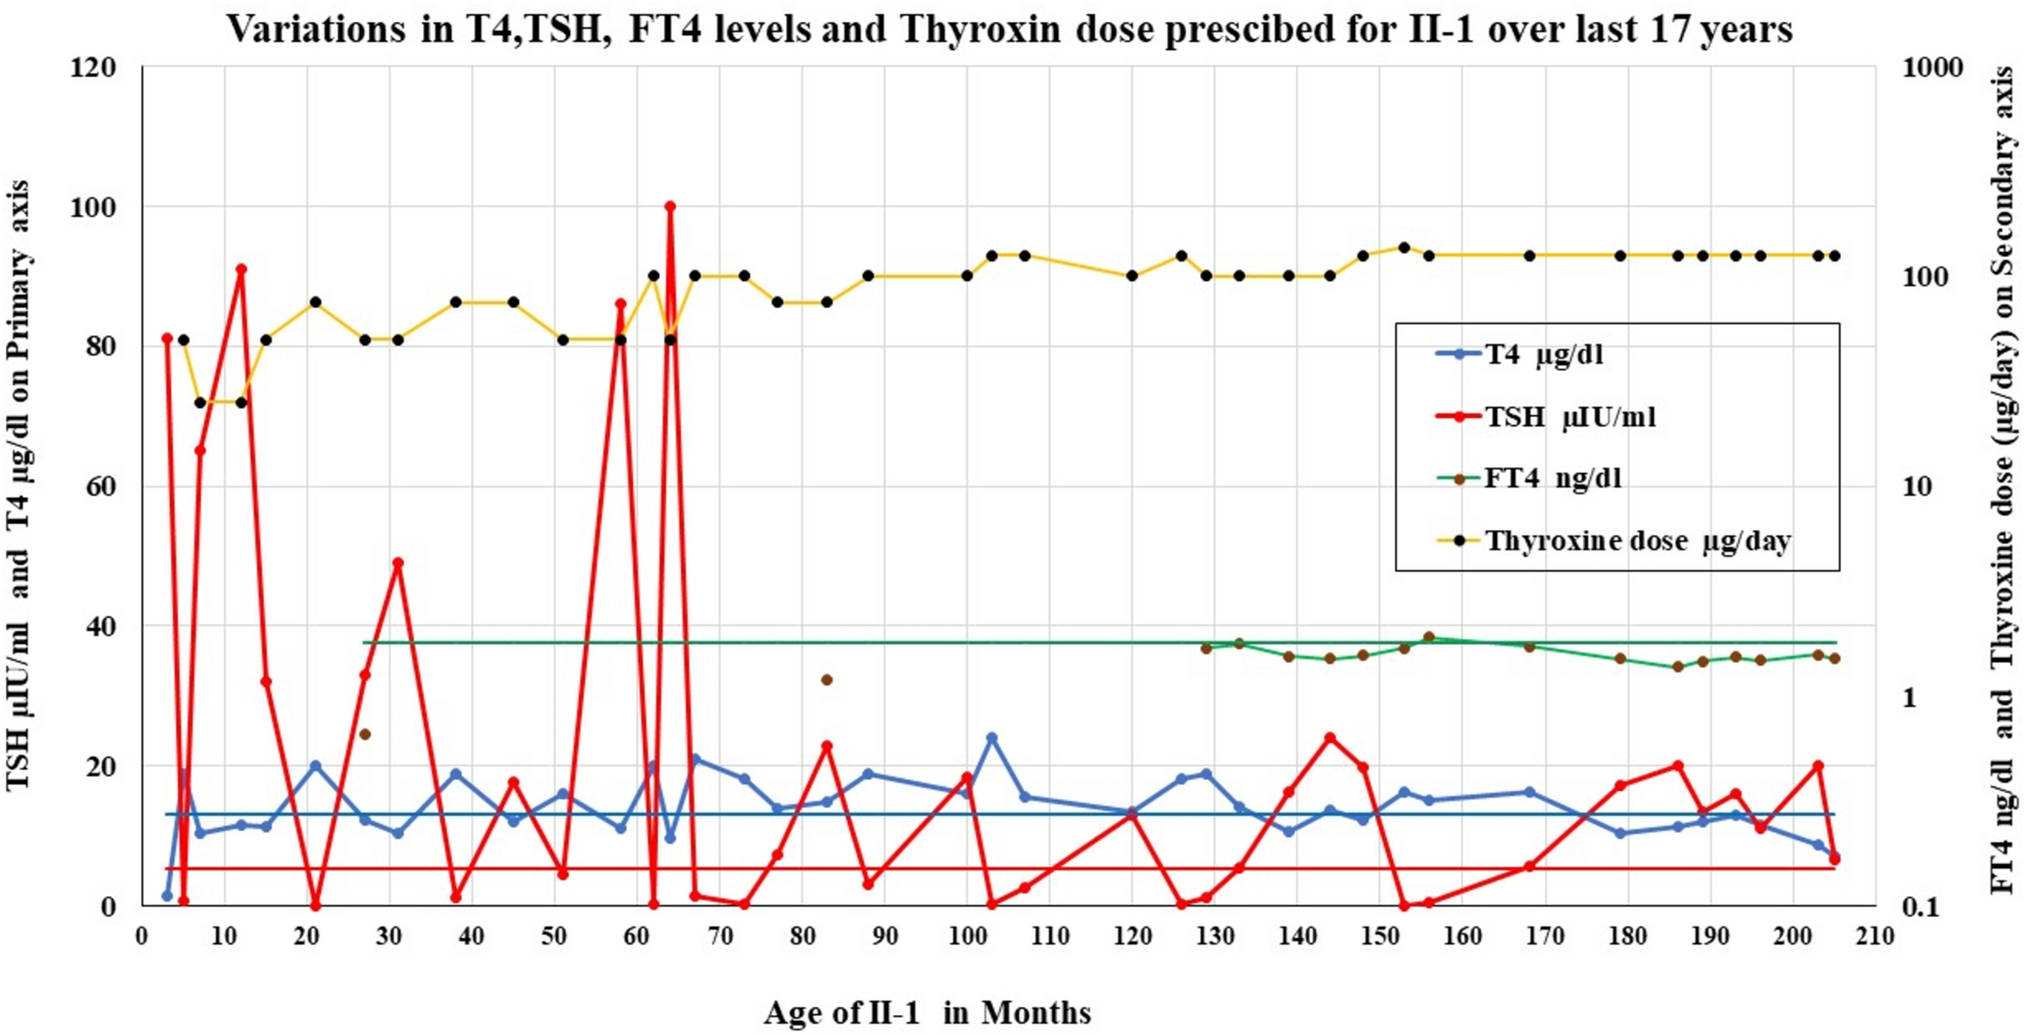 Co-existence of Congenital Hypothyroidism (CH) and TBG-Excess in a Boy Causing Simultaneous Elevation in Thyroid Stimulating Hormone (TSH) and Thyroxine (T4) Levels: First Report from India and Review of the Literature